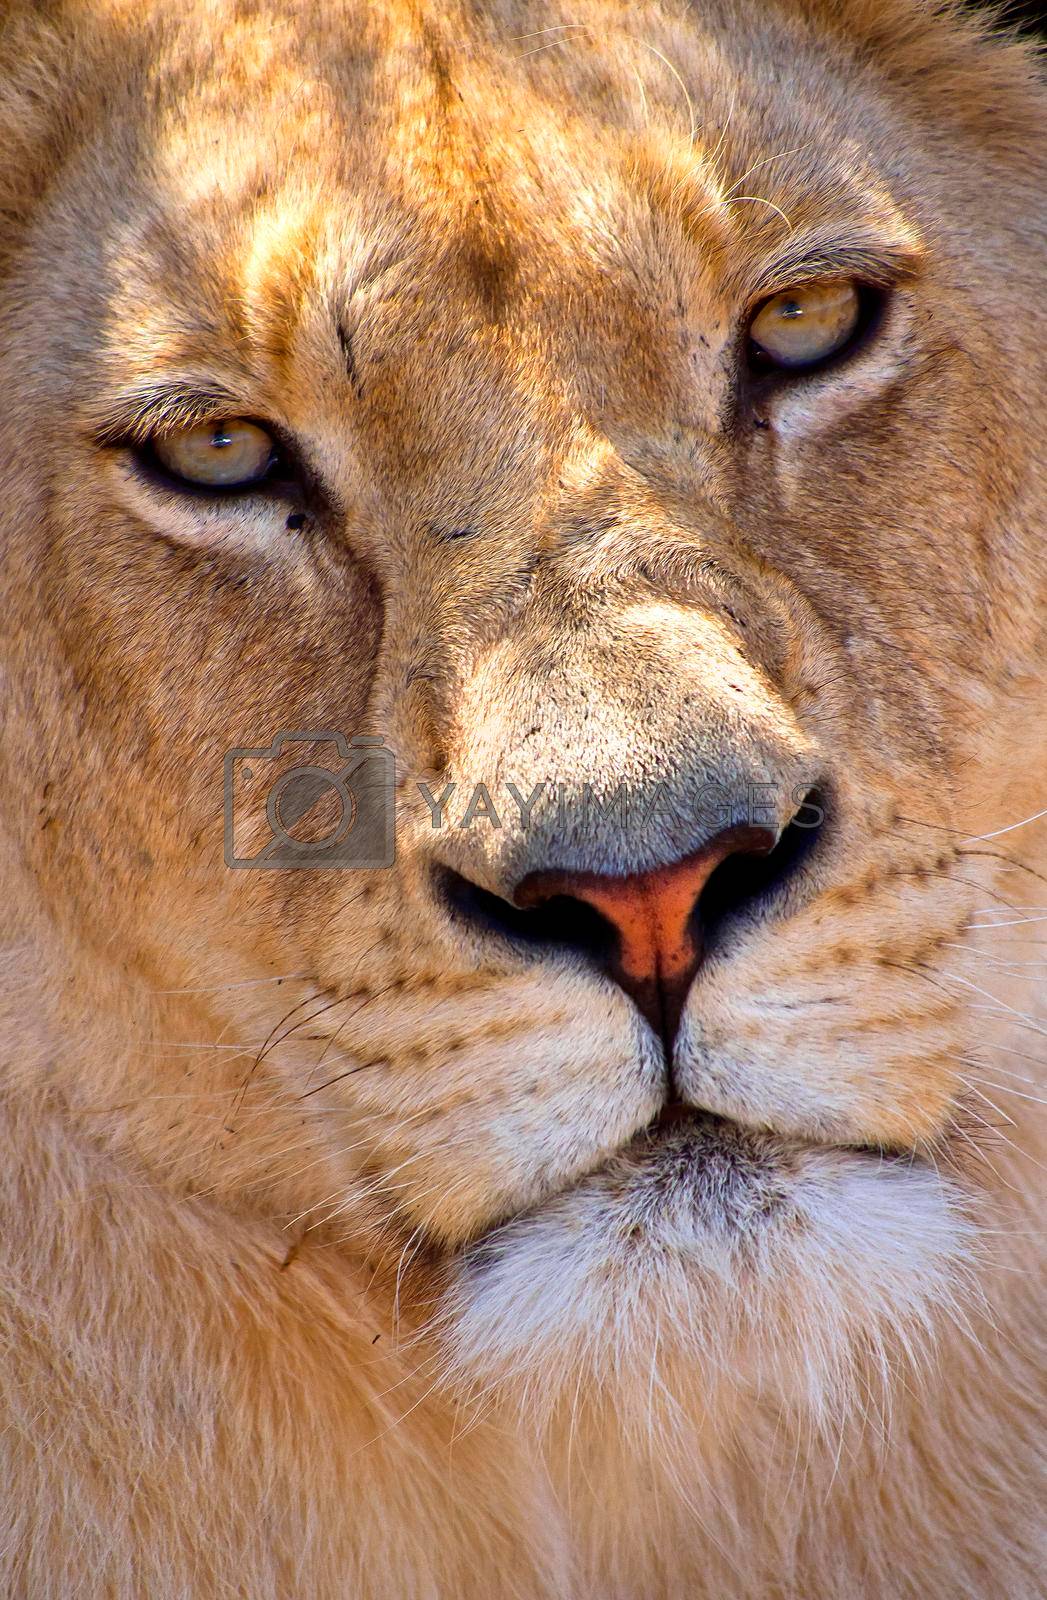 Royalty free image of Lion, Wildlife Reserve, South Africa by alcaproac